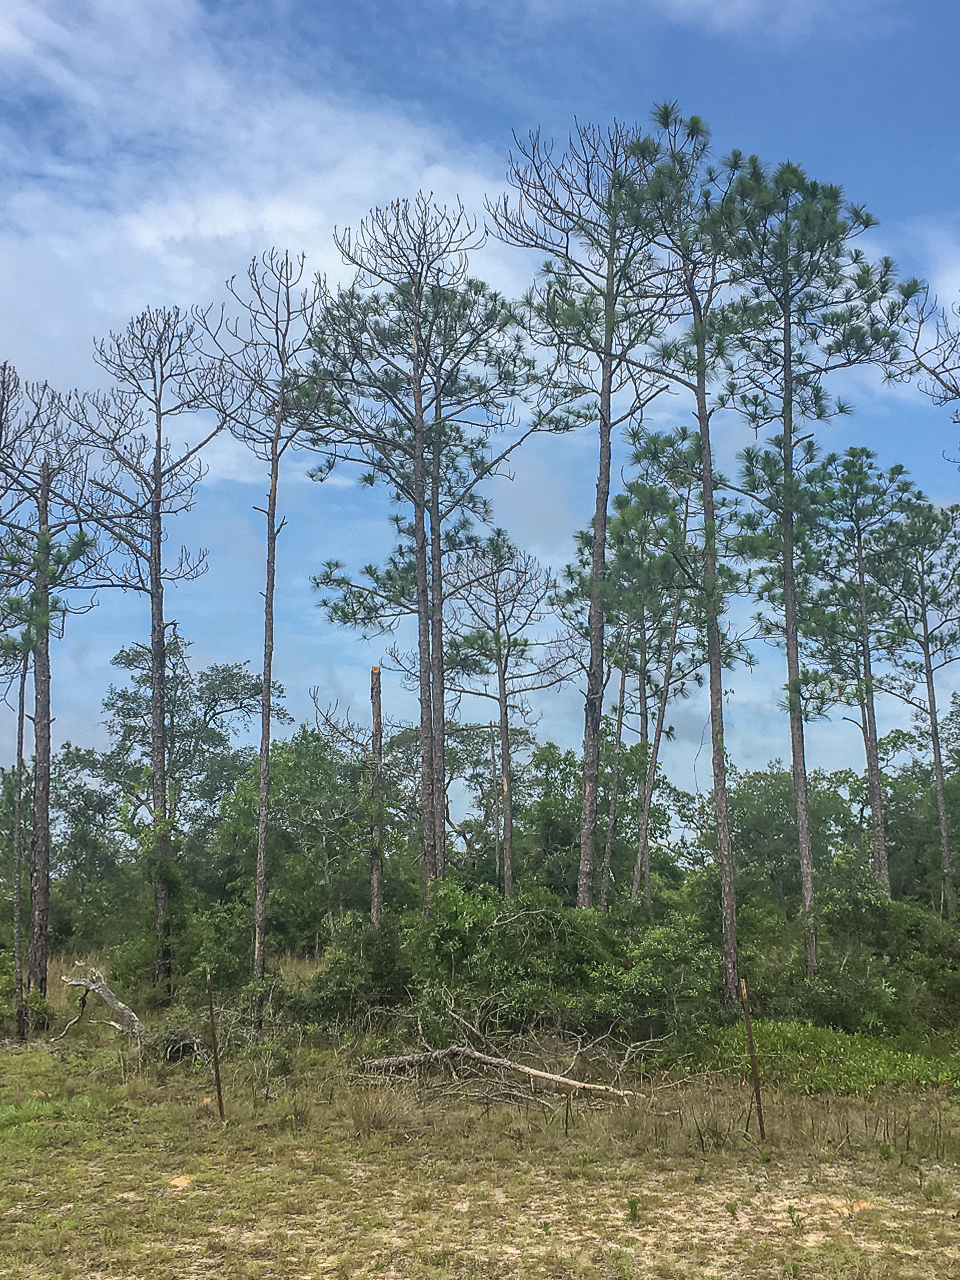 These pines grew tall and straight with most of the branches toward the top where they would receive the most sunlight. Trees with this type of structure may be very vulnerable to high winds, and some of these trees may have died due to hurricane damage. 